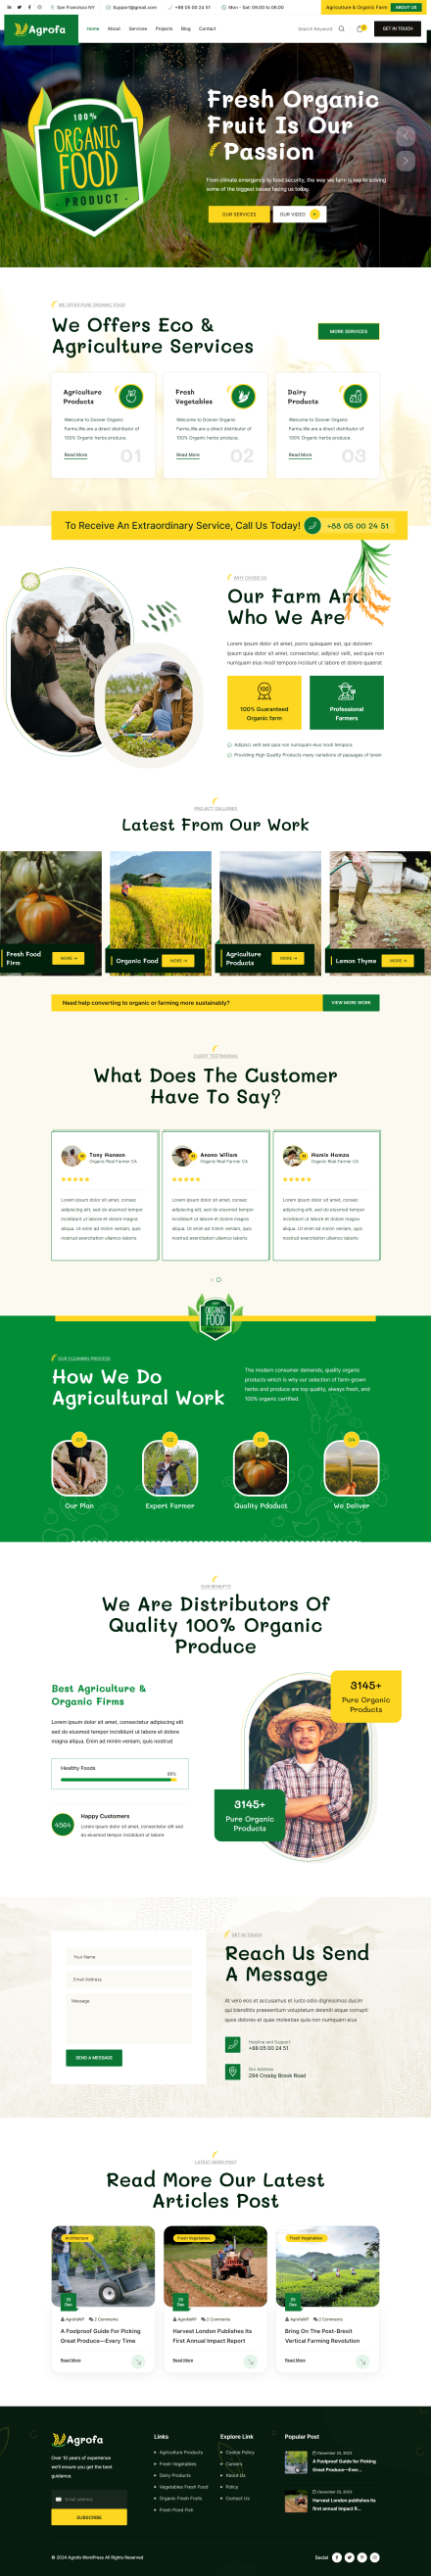 Agriculture Website Made by WordPress